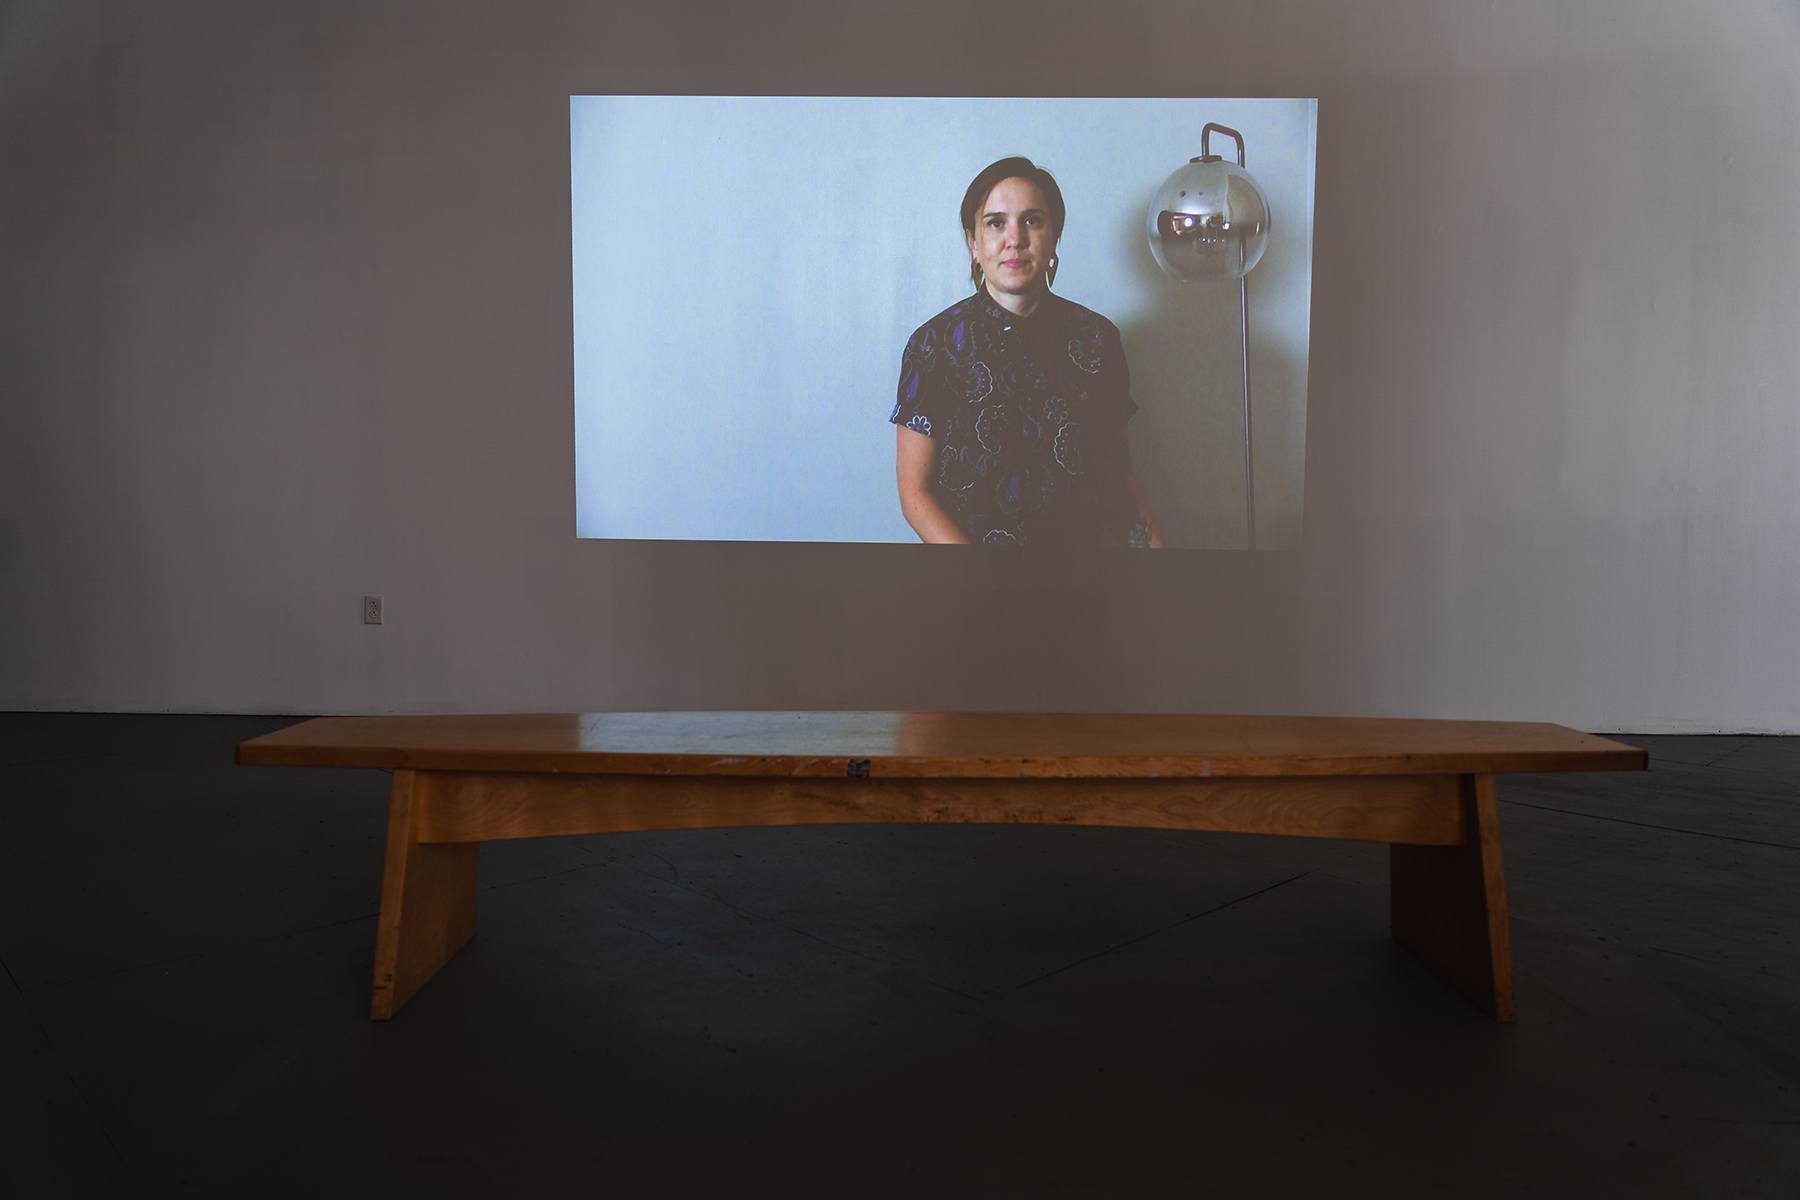 a projected video shows a person on screen looking at the camera. a wooden bench is in the foreground.